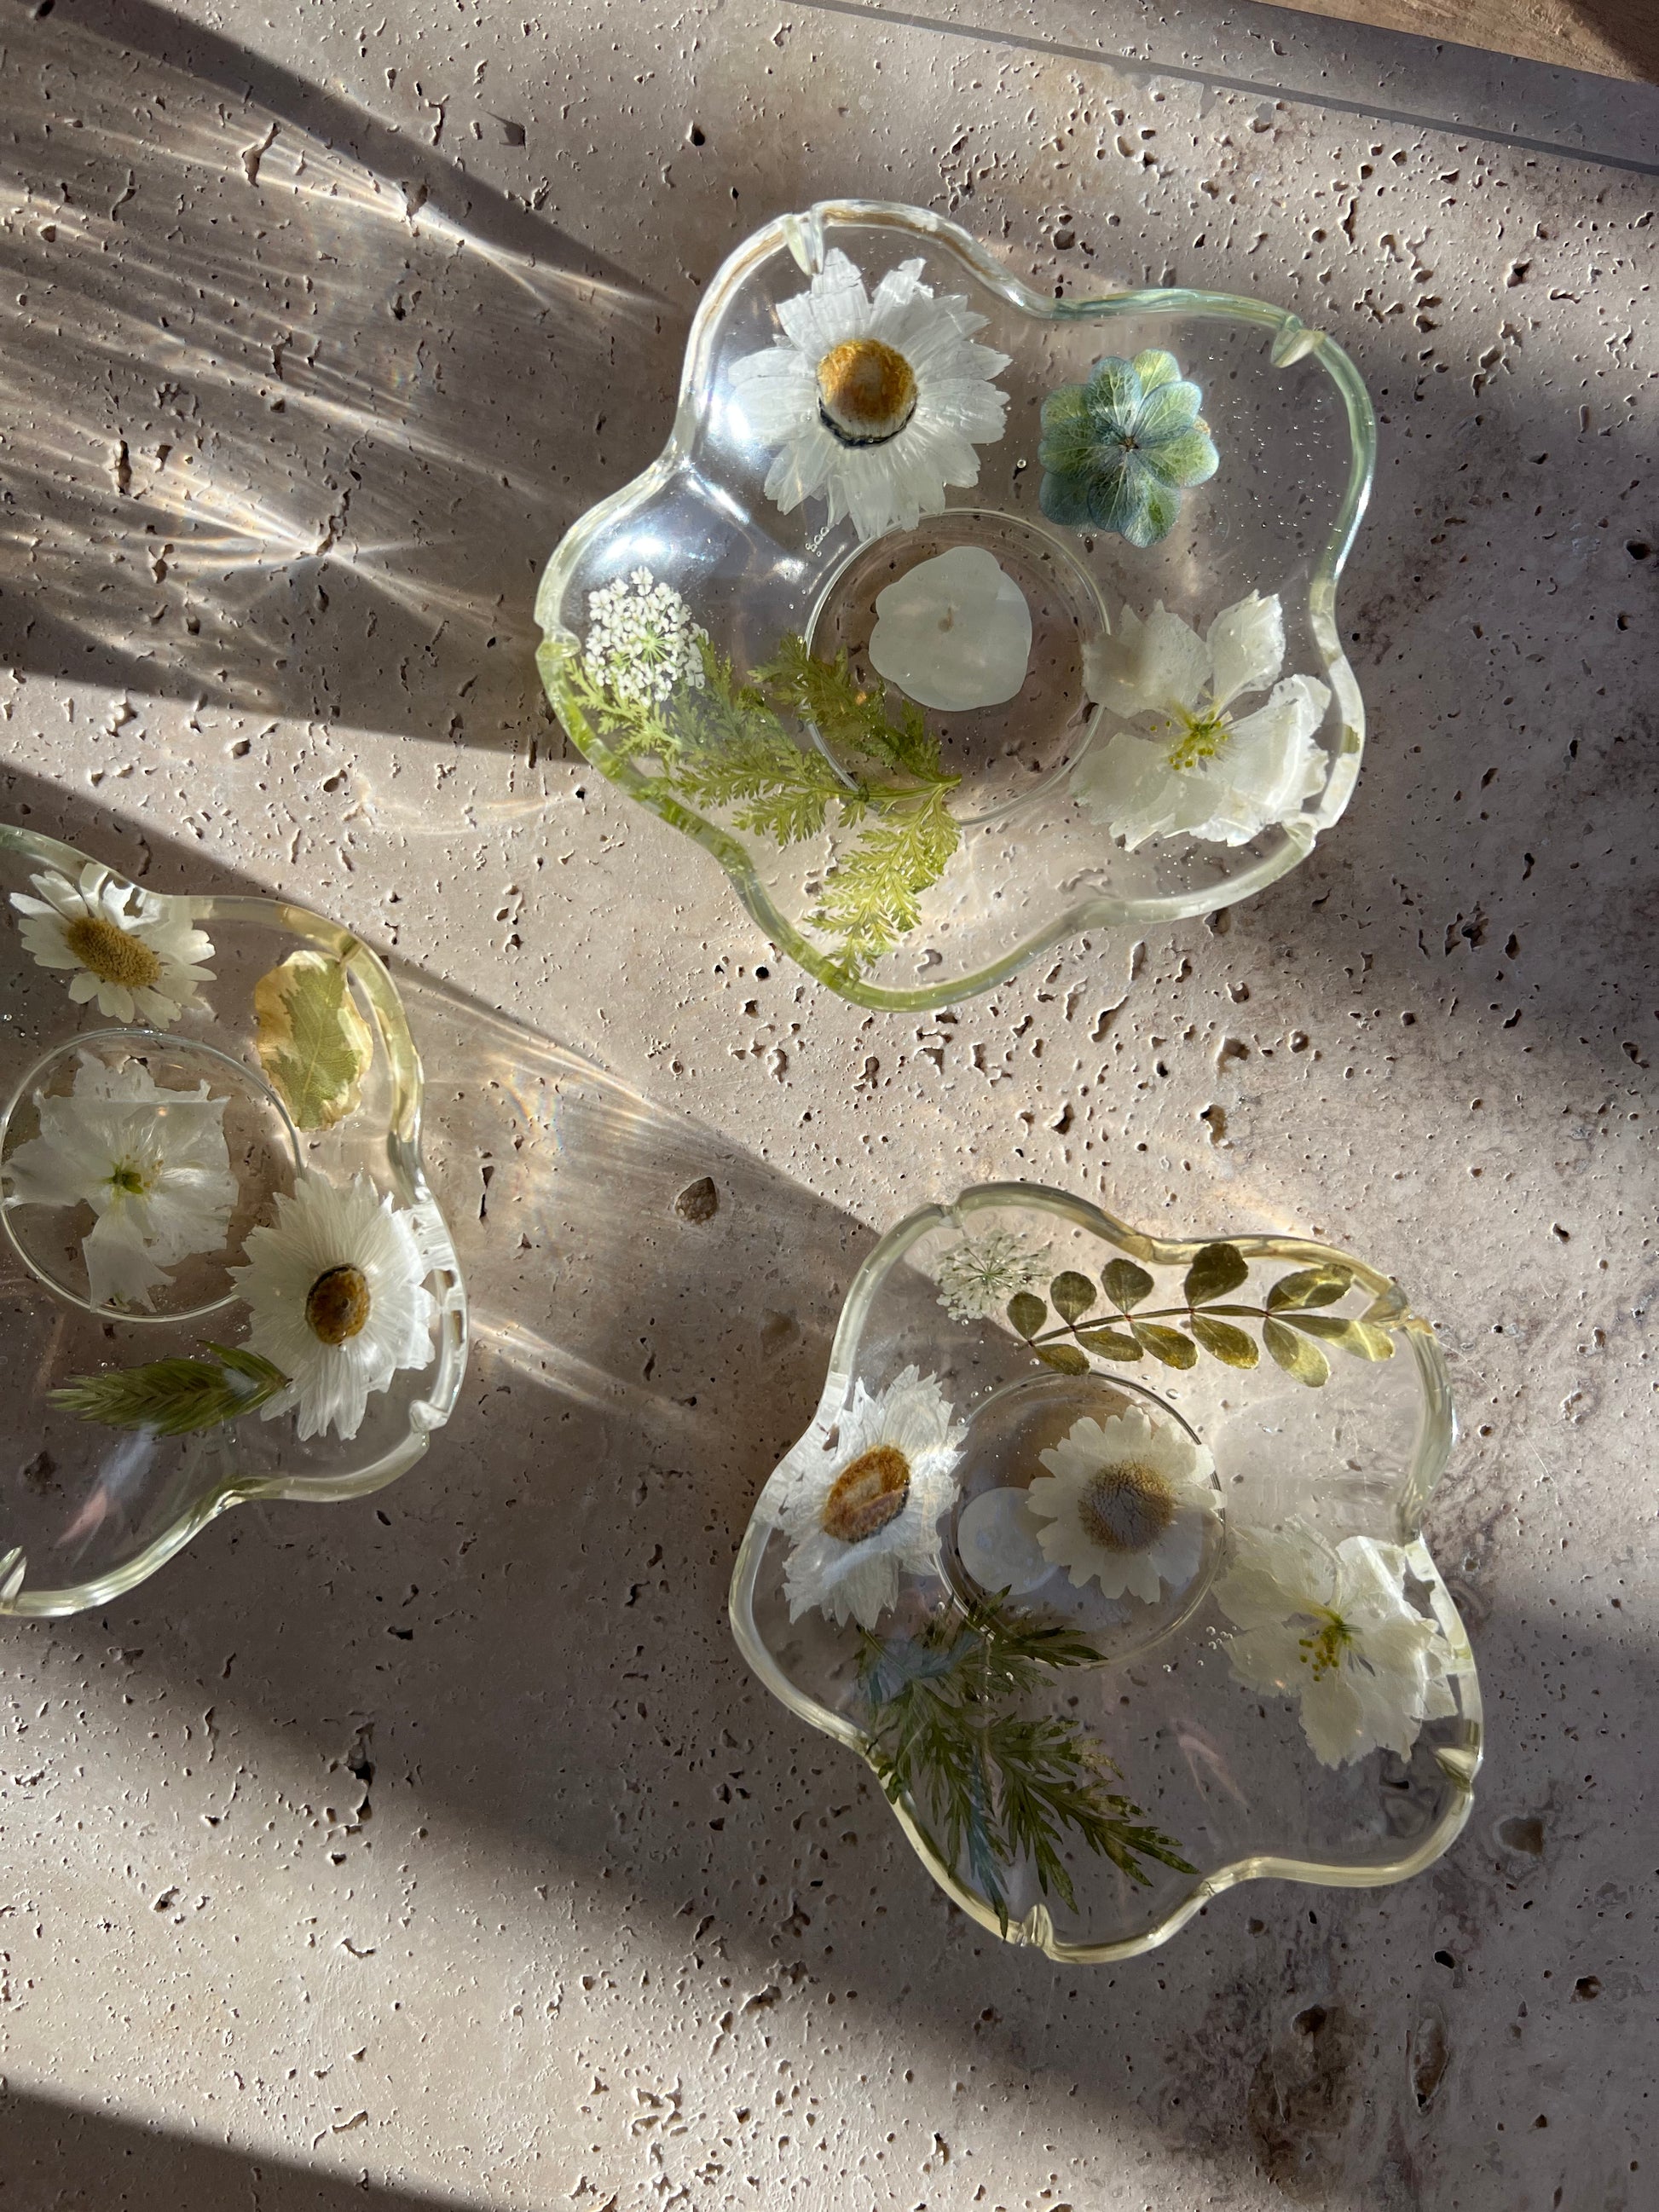 Functional art objects using hand-sourced, dried flowers encased in resin. Each piece is one of a kind and totally unique, made by hand in Lee Meszaros' home studio in Hamilton, Ontario.